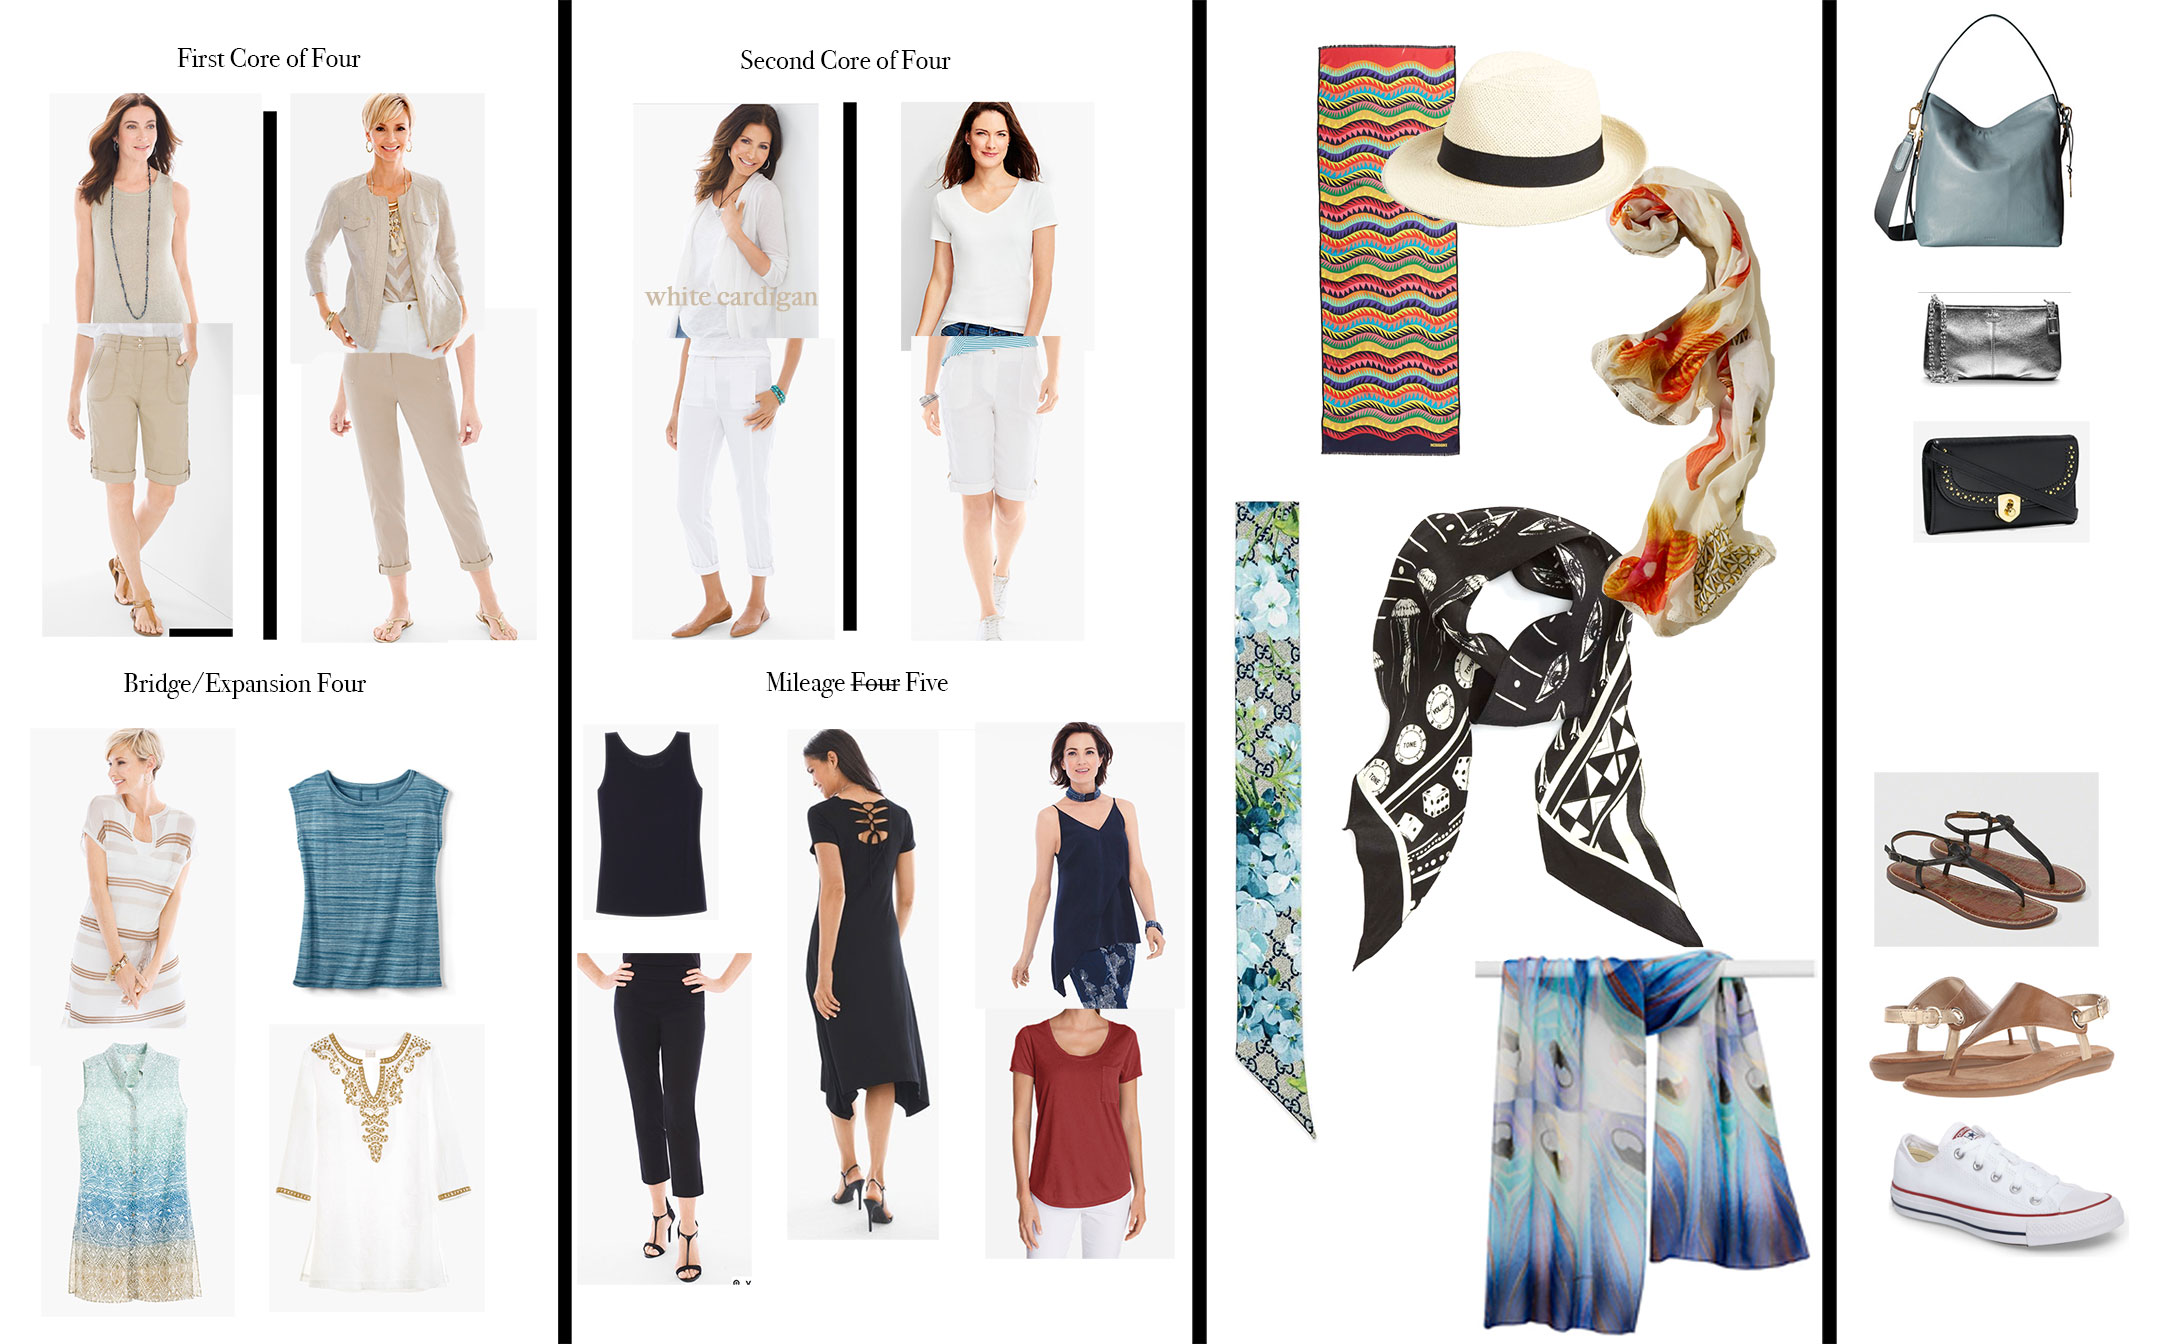 Capsule Travel Wardrobe showing what to pack for a two week cruise Caribbean